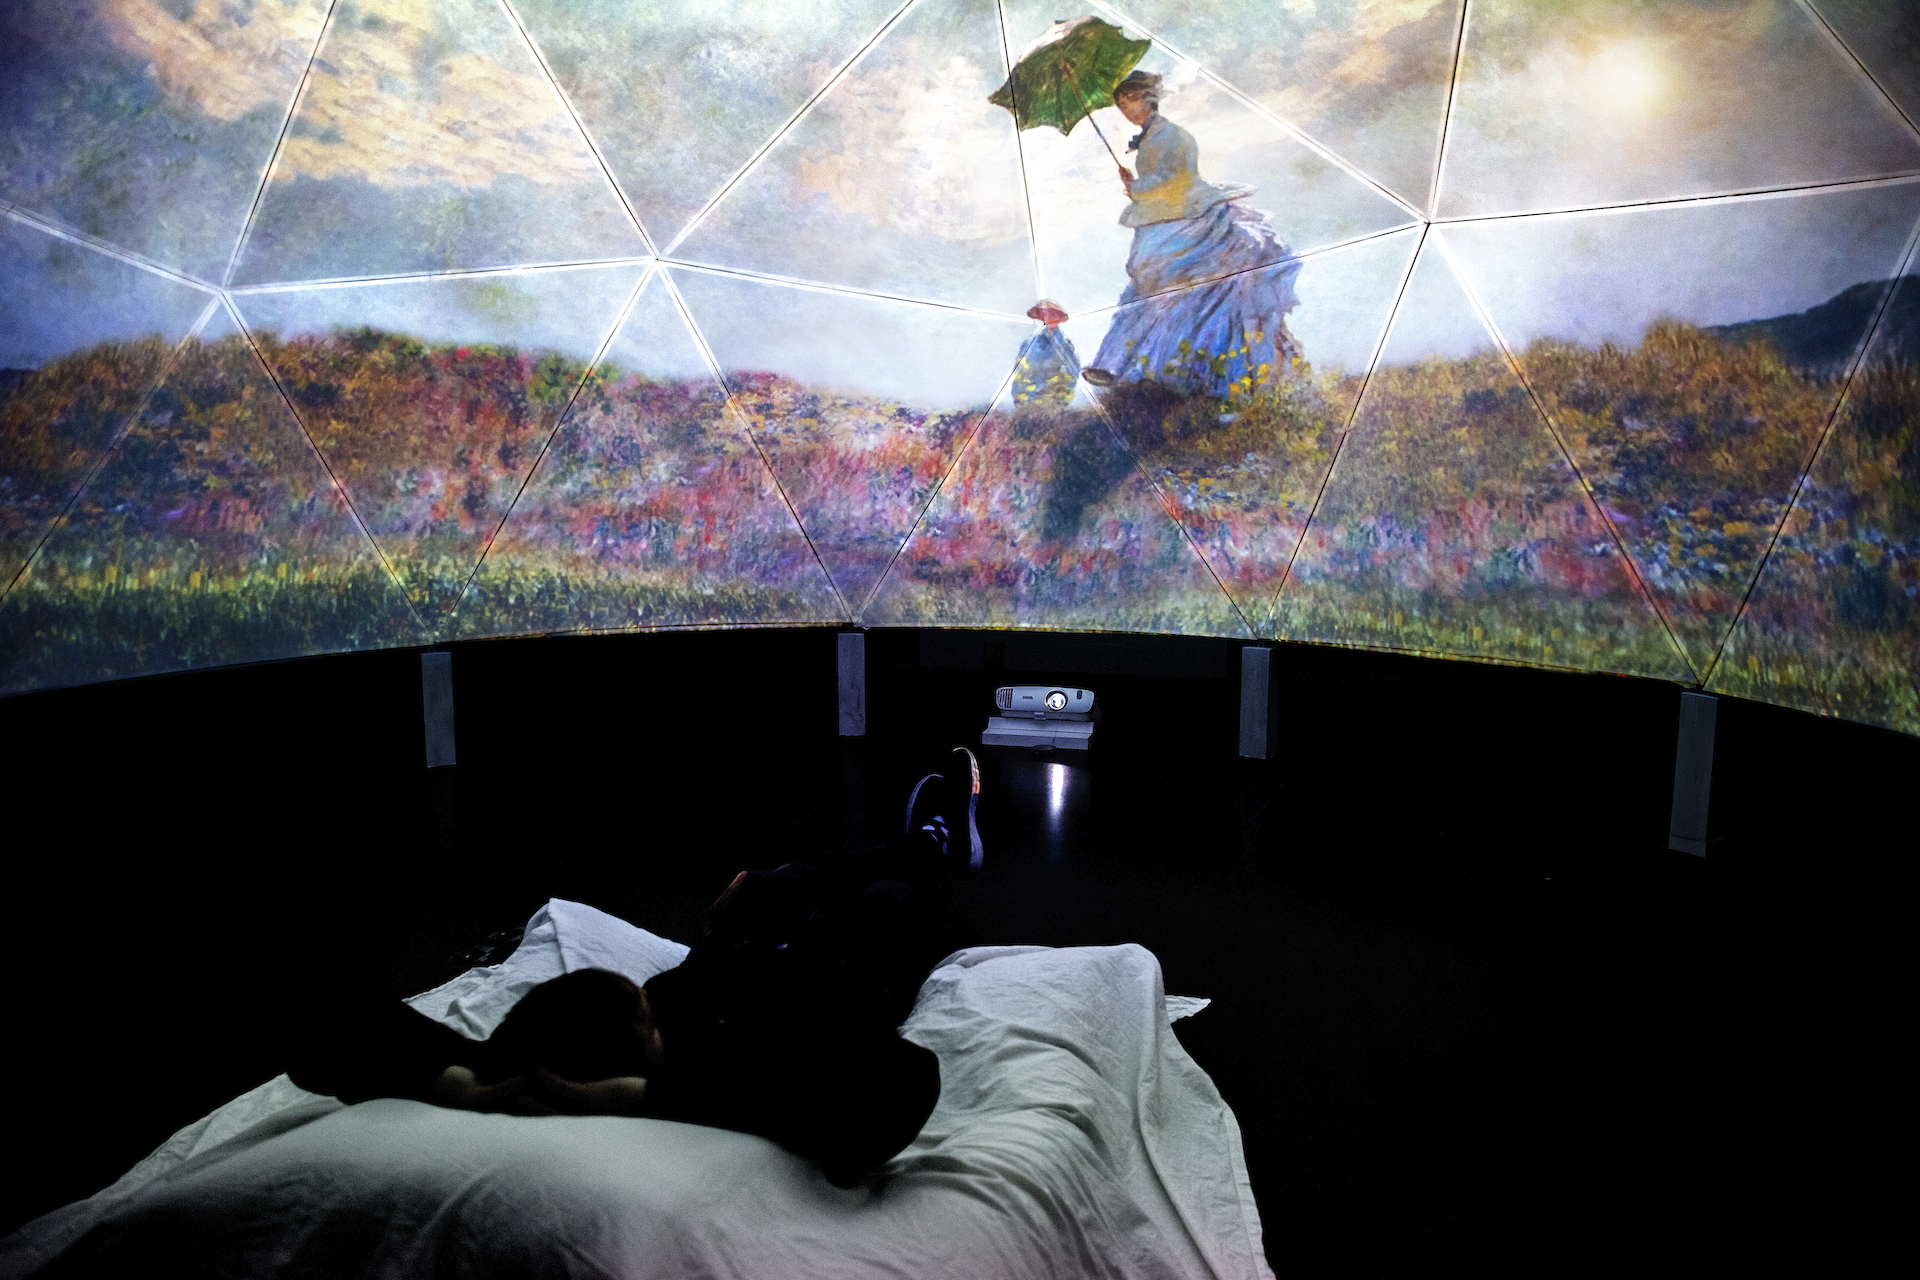 Art by Monet projected on a large wall.  On the floor are a projector and a visitor lying on a bed, looking up at the projection.